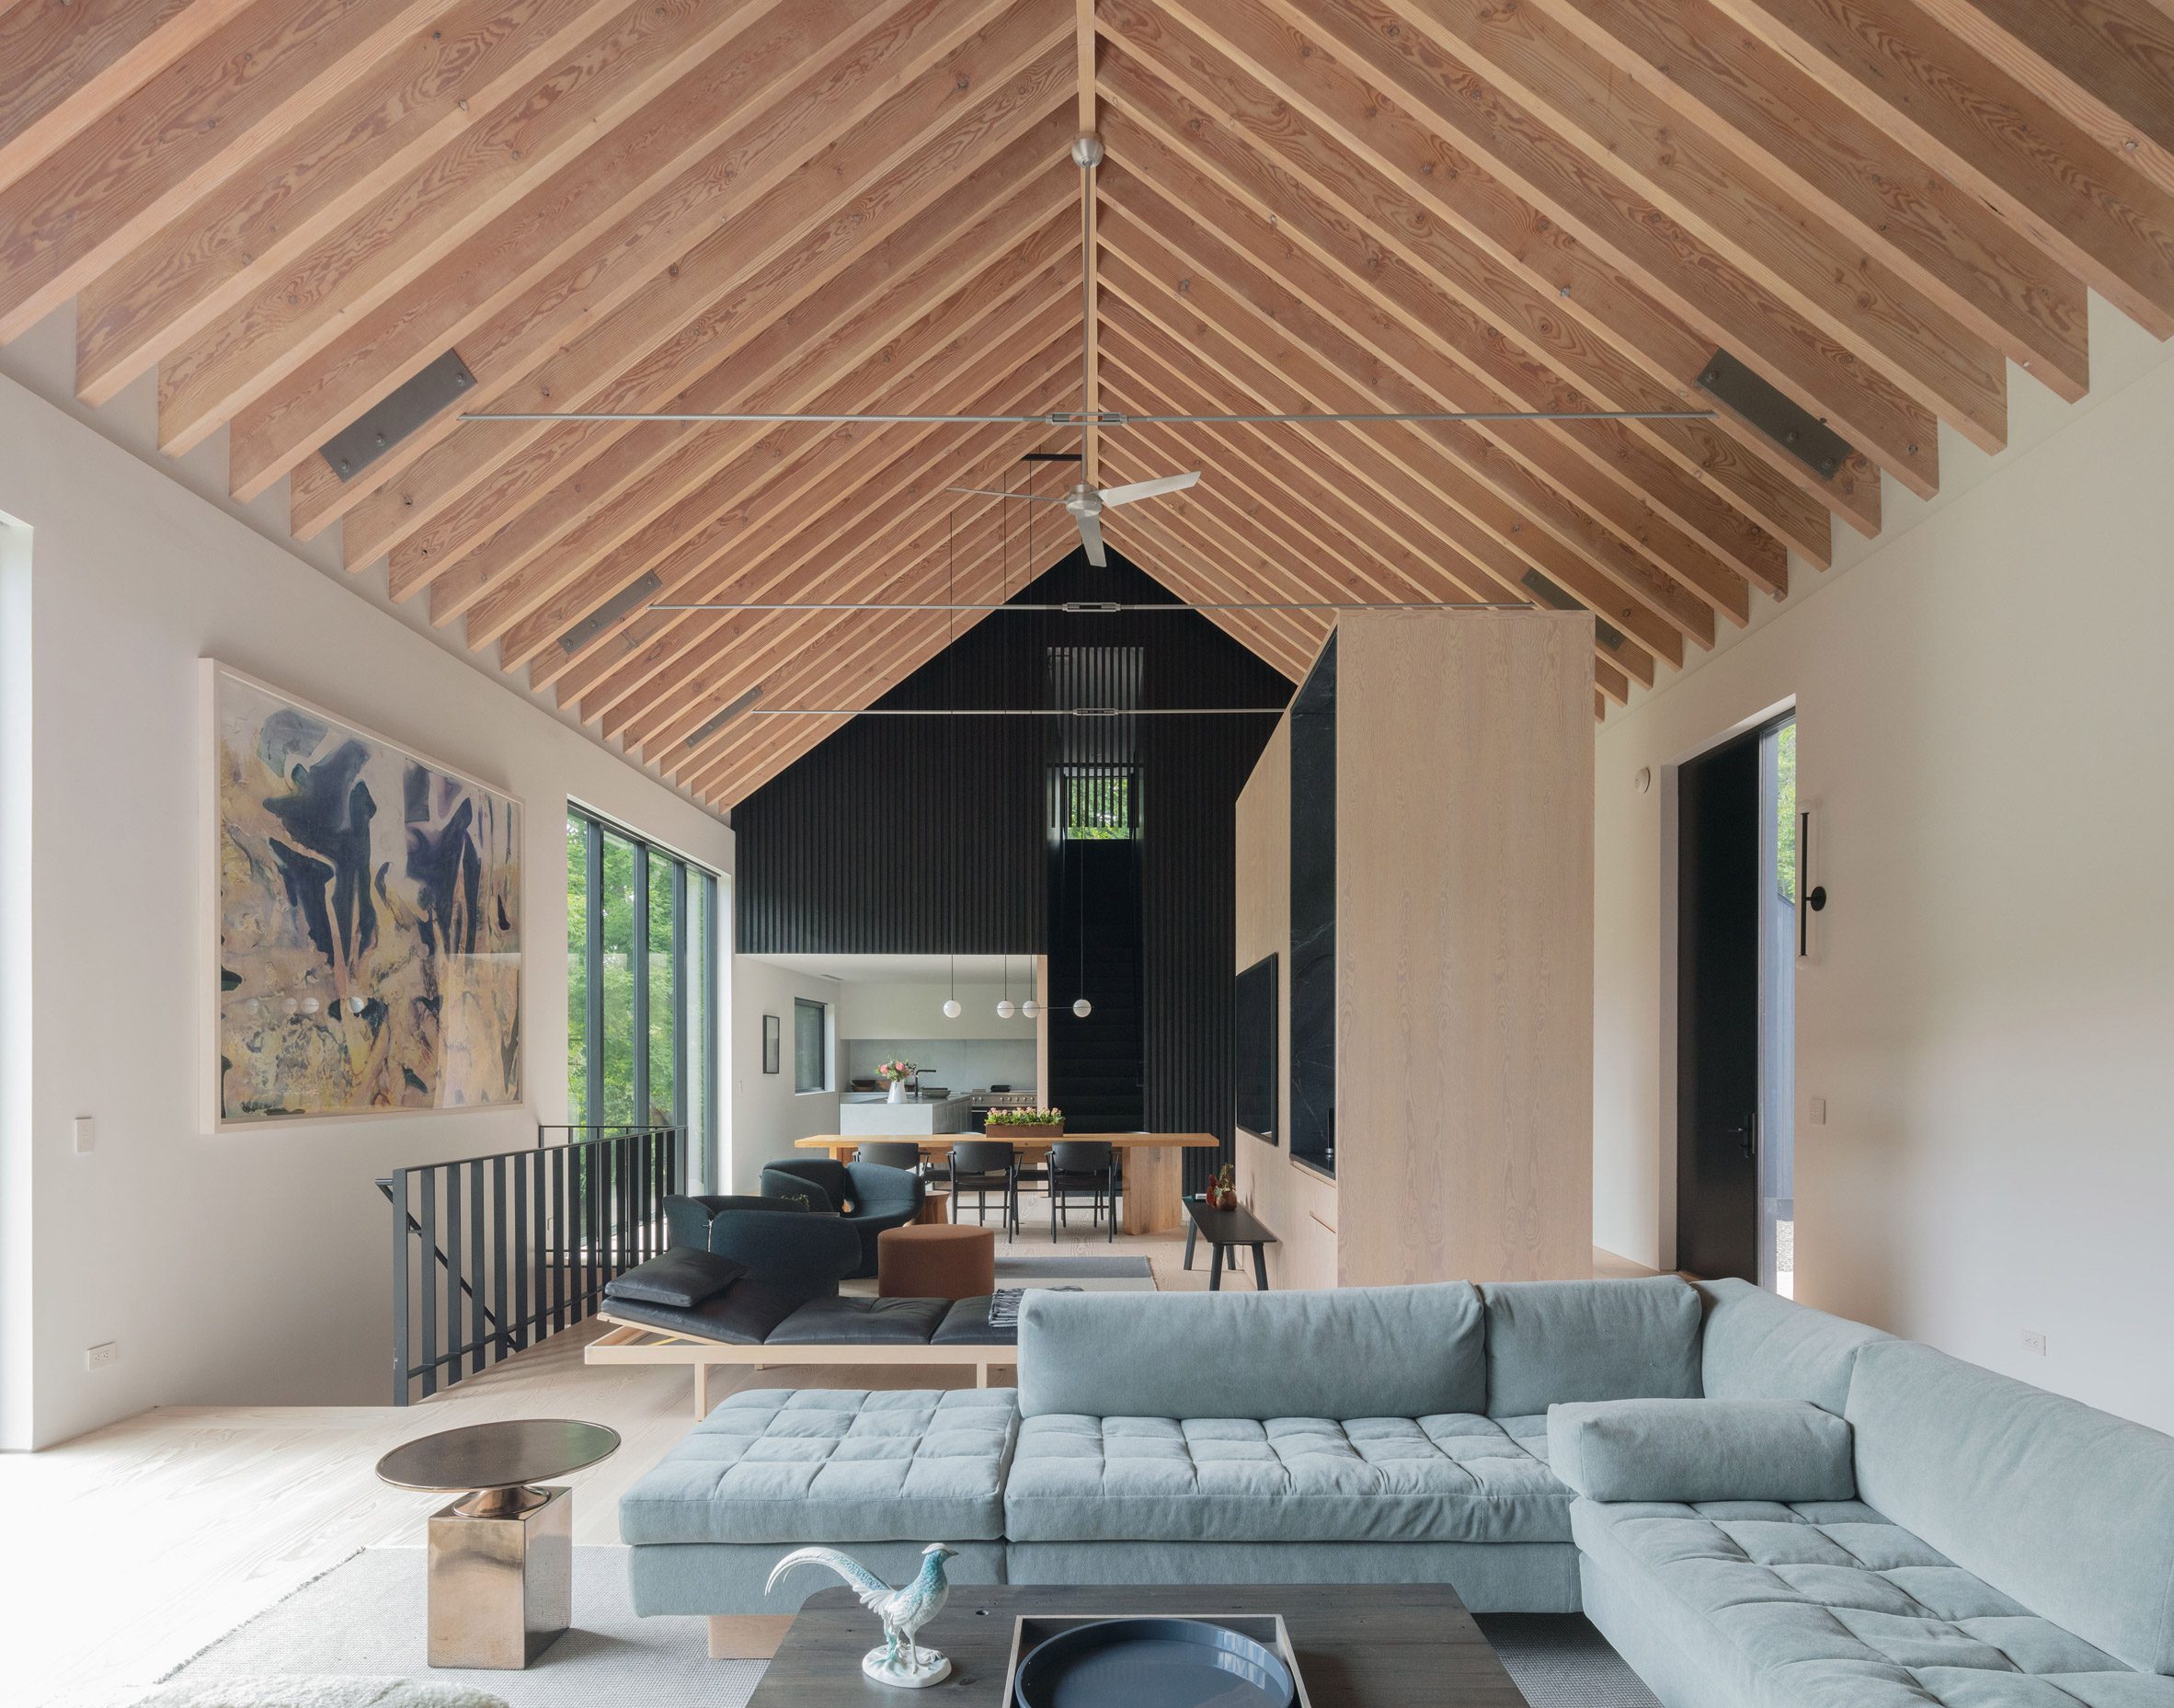 Open-plan living space with exposed pitched timber roof and rafters